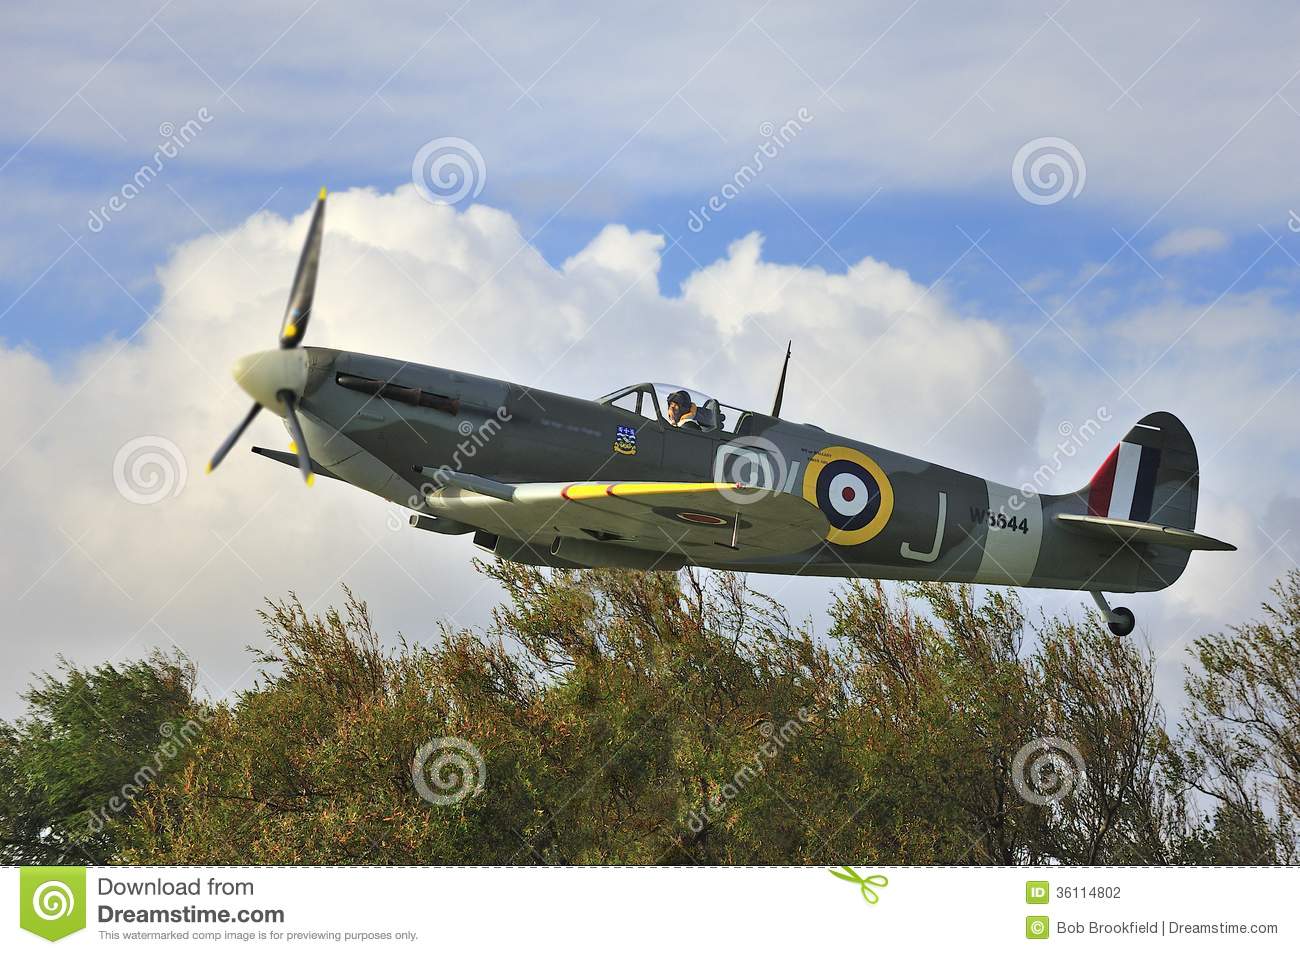 Spitfire Memorial W3644 Editorial Photography   Image  36114802